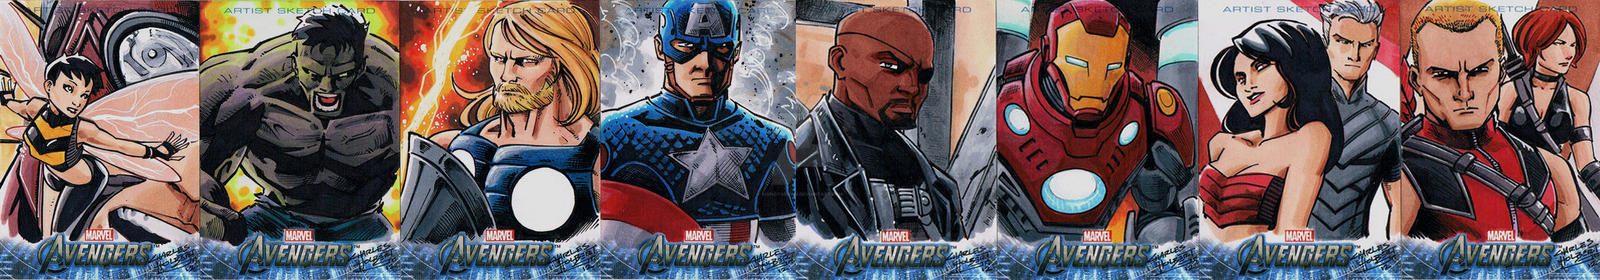 Avengers sketch cards The Ultimates